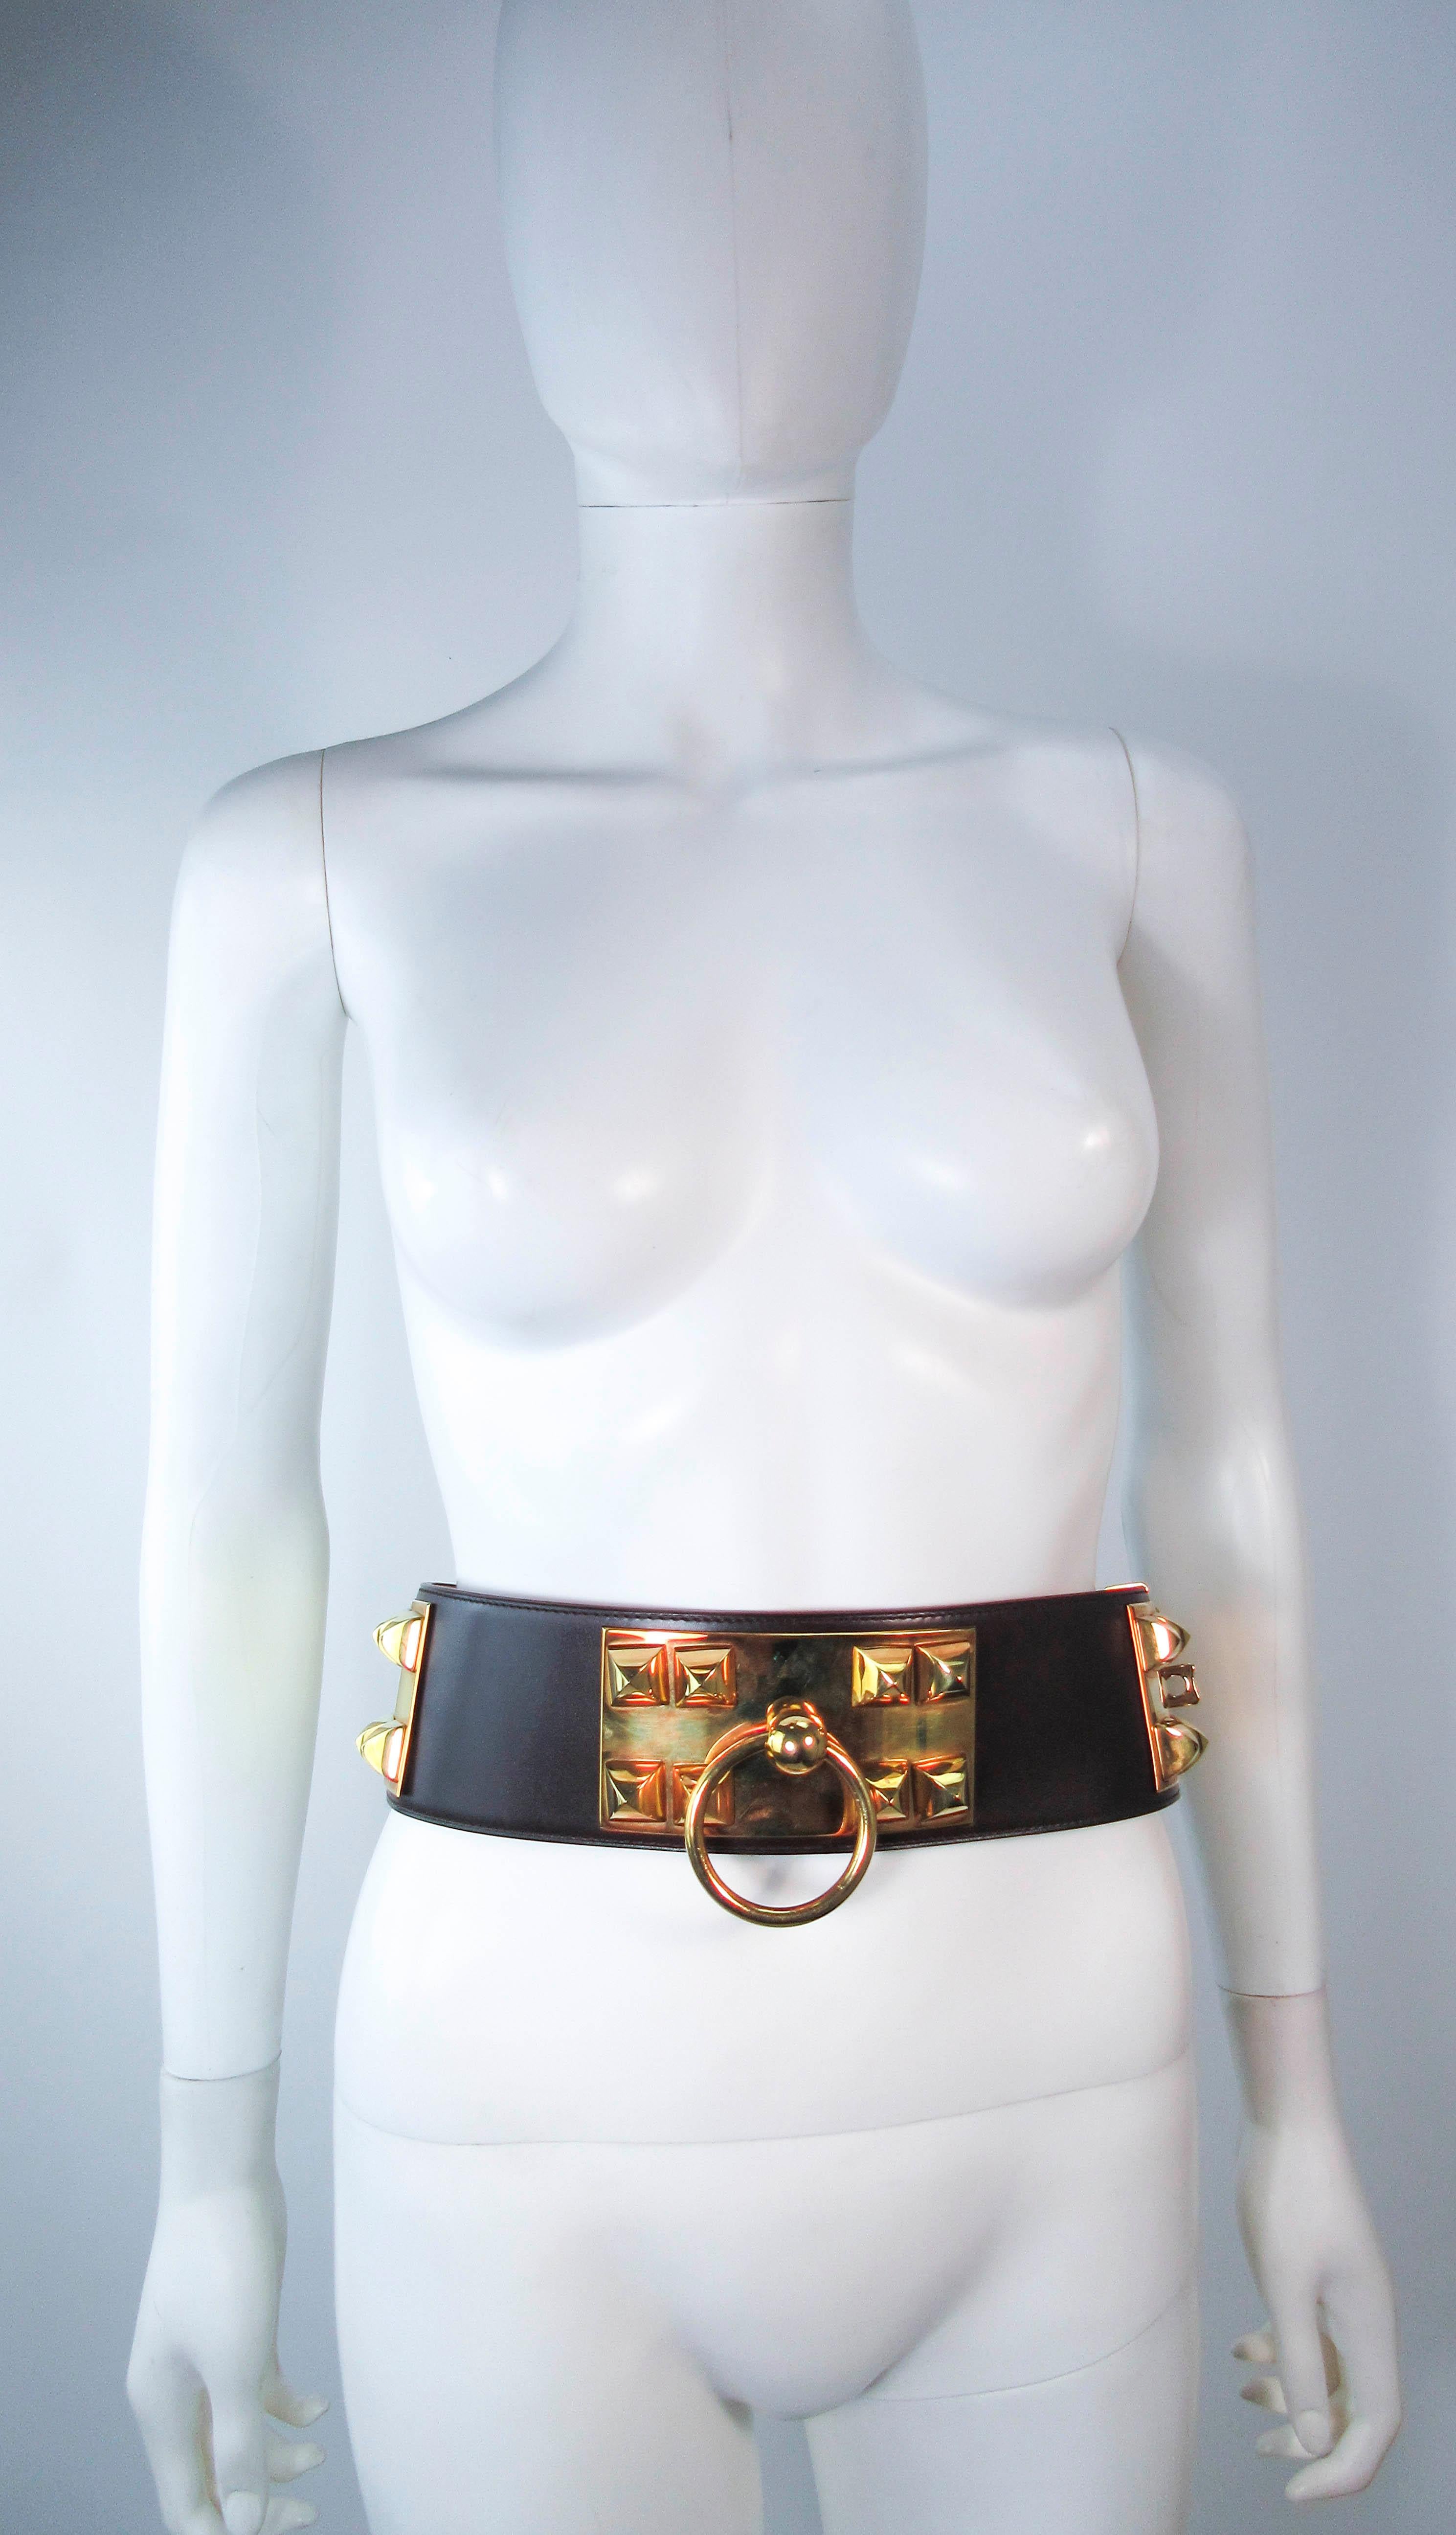 This vintage Hermes belt is composed of a brown leather with gold hardware. Features a turn-lock closure with a large circle accents. This is a fantastic statement piece and excellent addition to any collectors wardrobe. In excellent pre-owned